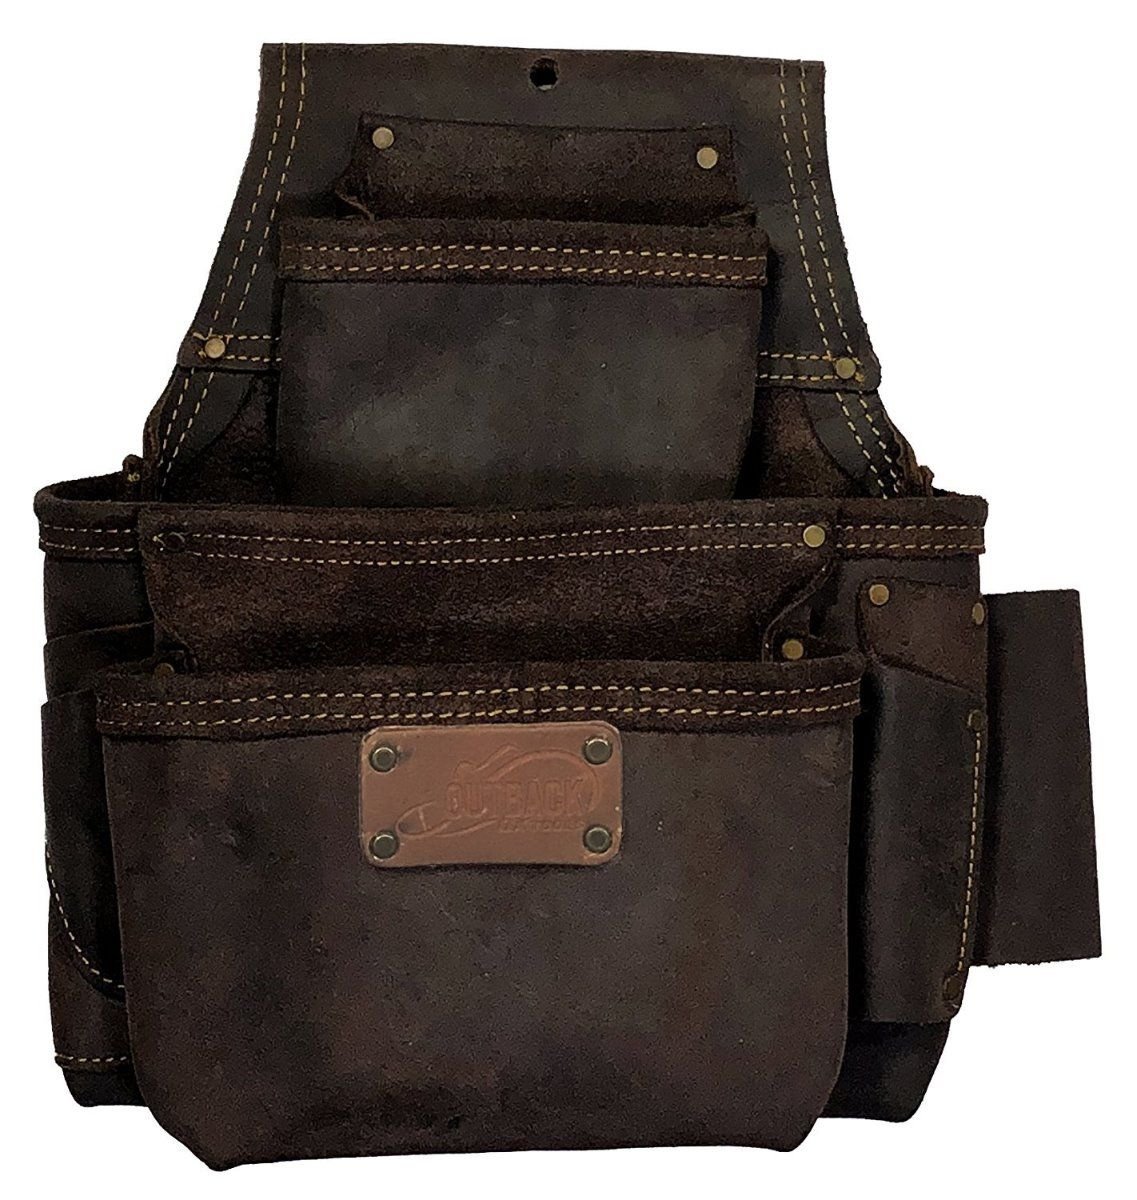 OX-P263503 - OX PRO FASTENER BAG, OIL-TANNED LEATHER, 3 POUCH